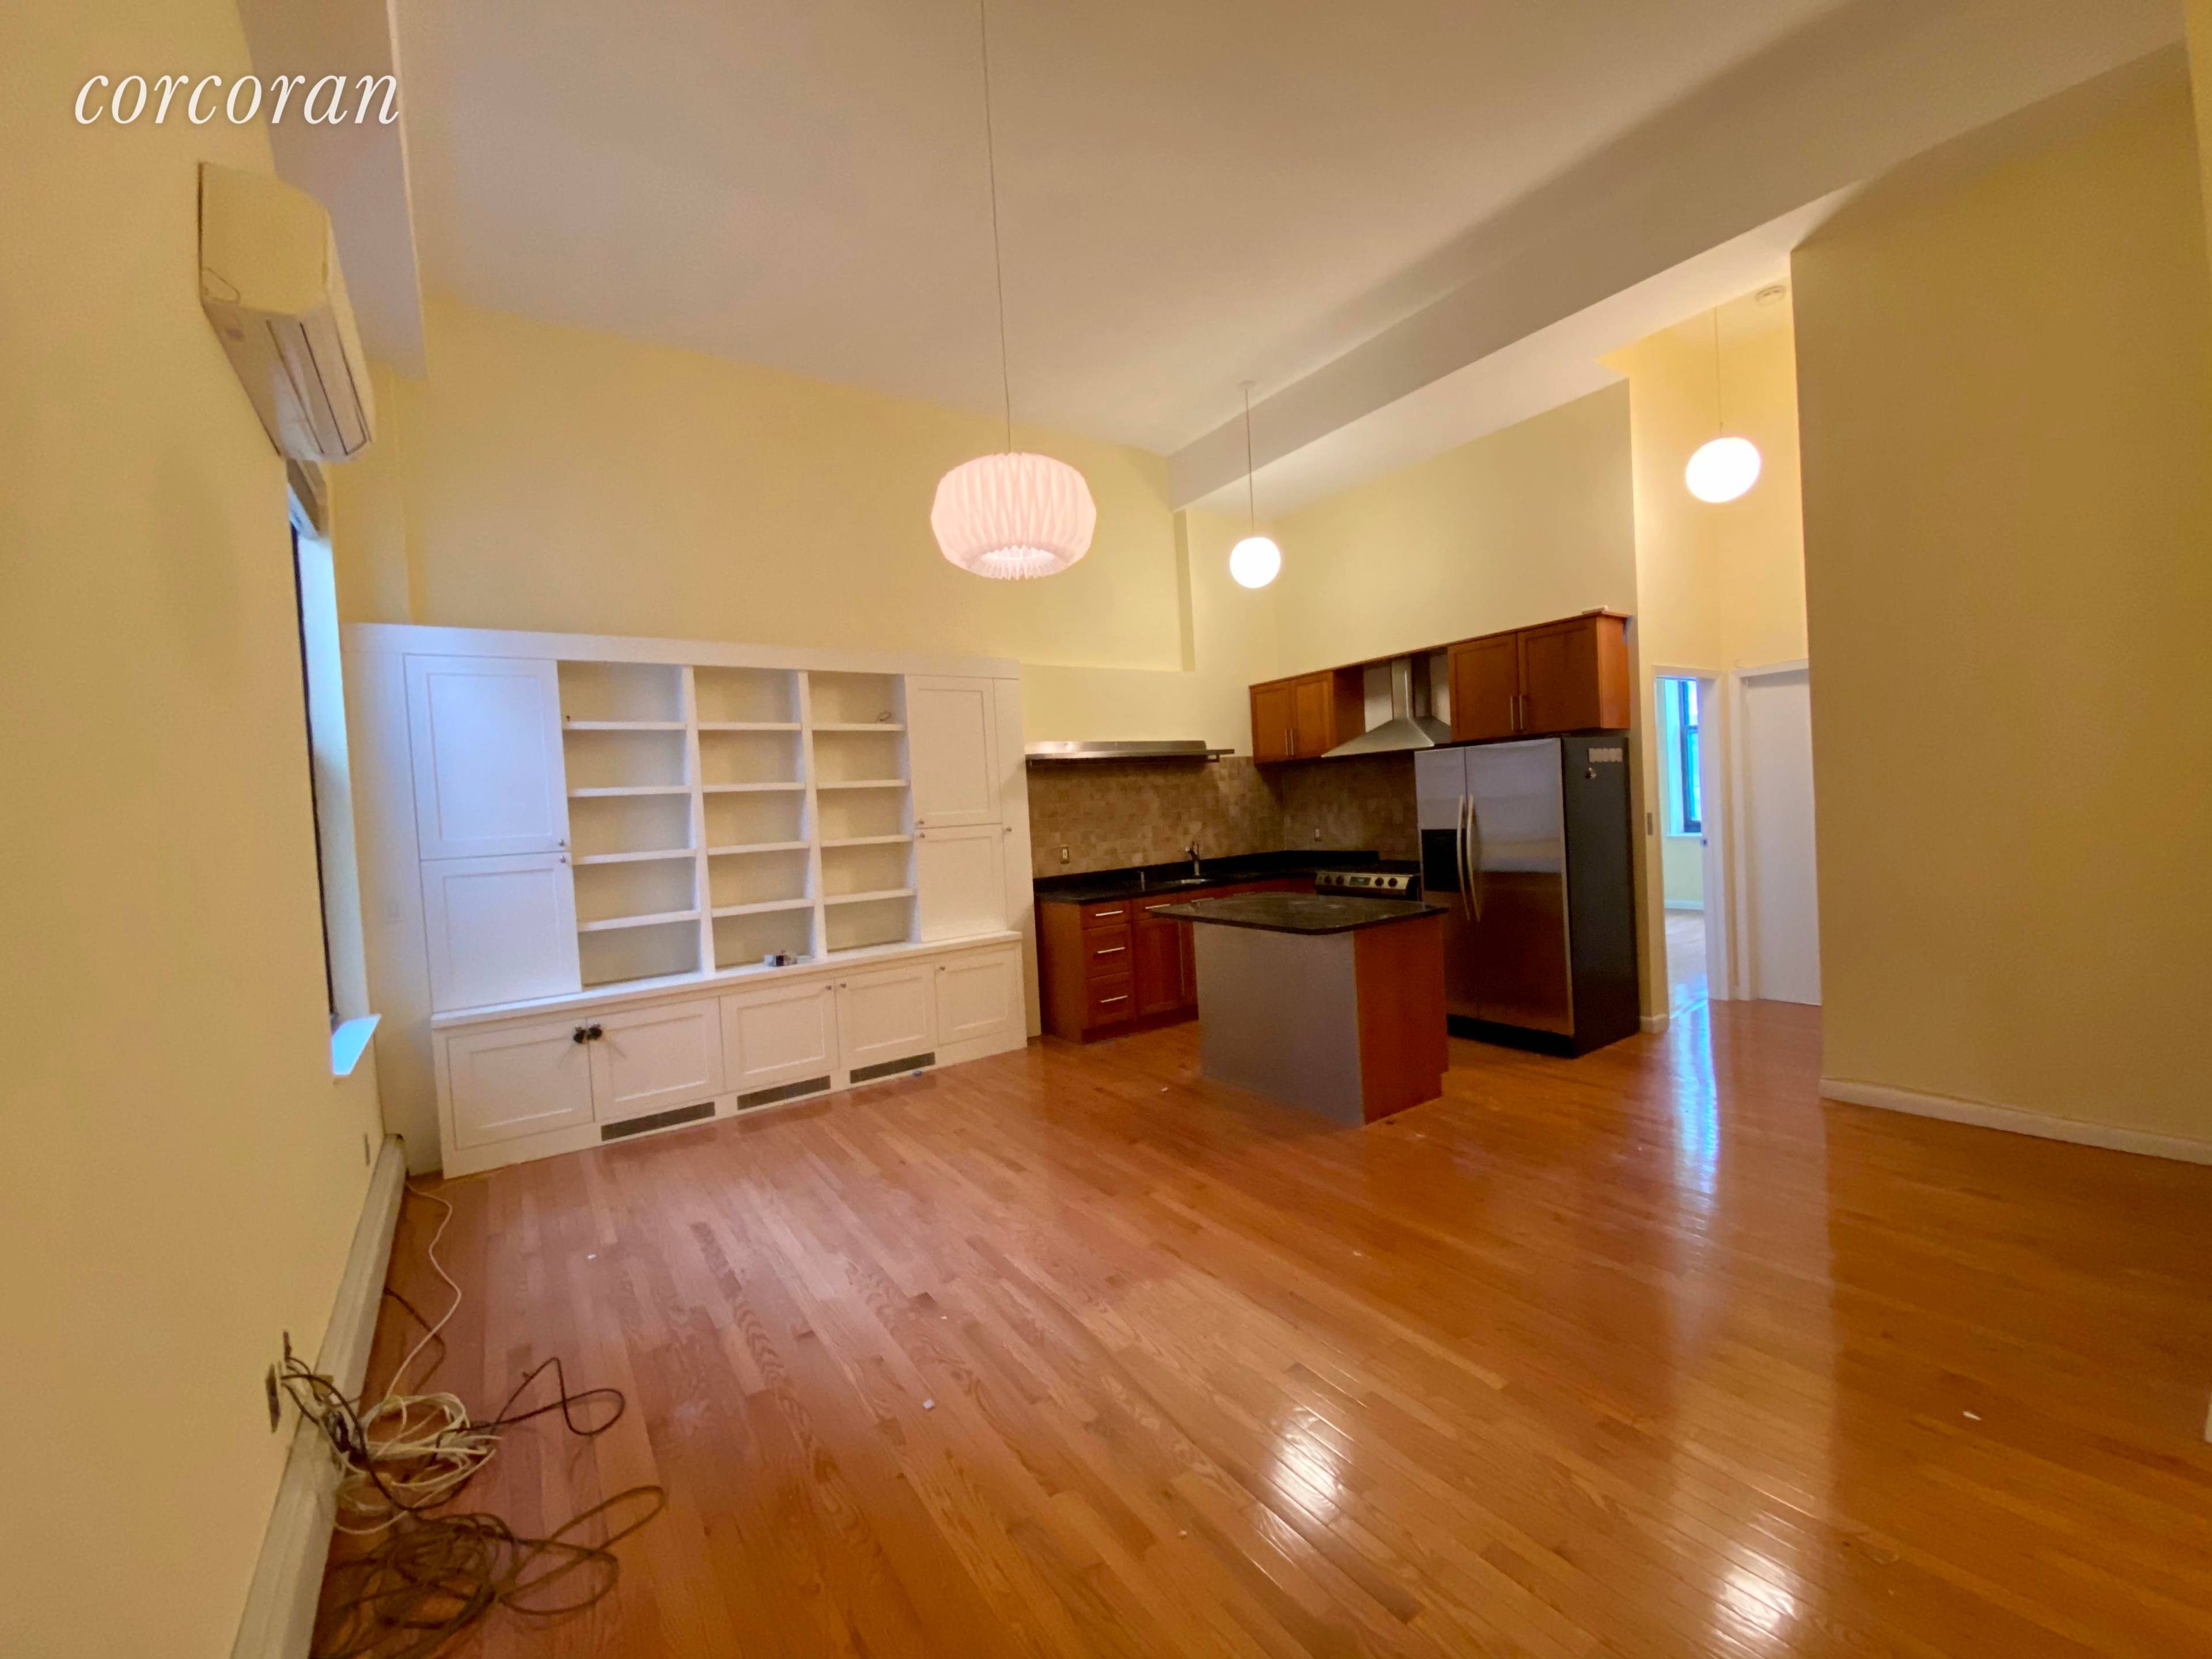 Beautiful huge high ceiling duplex apartment with 2 bedrooms, 2 full baths, 2 living rooms, extra kitchenette and 2 large bonus rooms downstairs all in the heart of Brooklyn's best ...